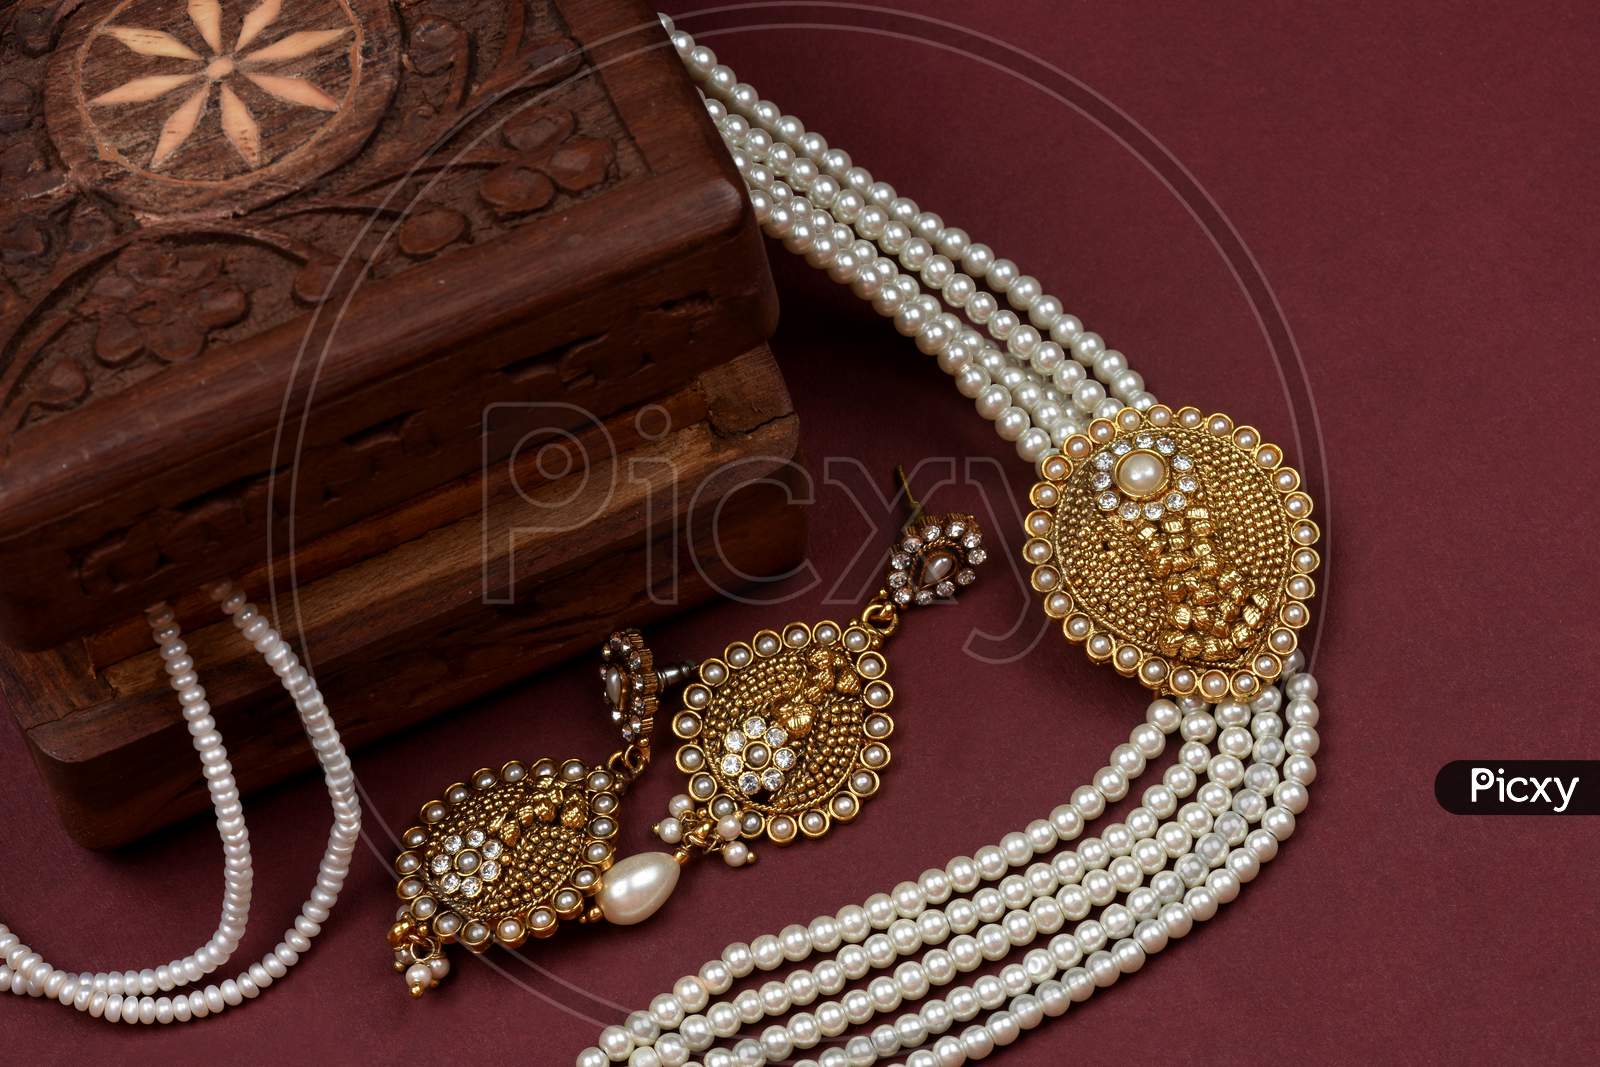 Vintage Wooden Jewellery Box With Indian Traditional Jewelry, Pearl Earrings, Pearl Bracelet Luxury Female Jewelry, Indian Traditional Jewellery,Bridal Gold Wedding Jewellery, Pearl Jewelry